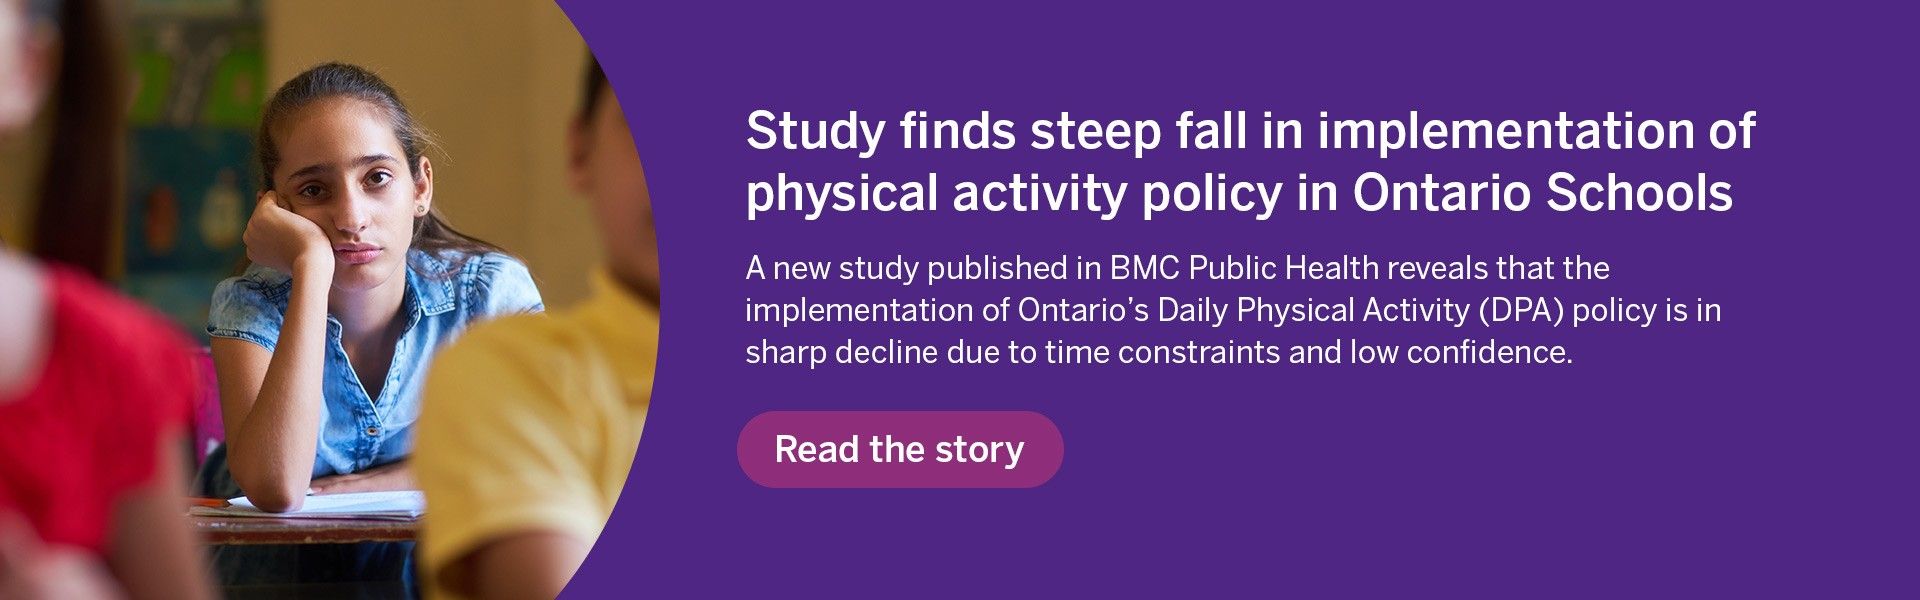 Study finds steep fall in implementatino fo physical activity poilcy in ontario schools. A new study published in BMC public health reveals that the implementation of ontario's daily physical activity (DPA) policy is in sharp decline due to time constraints and low confidence. Read the story.